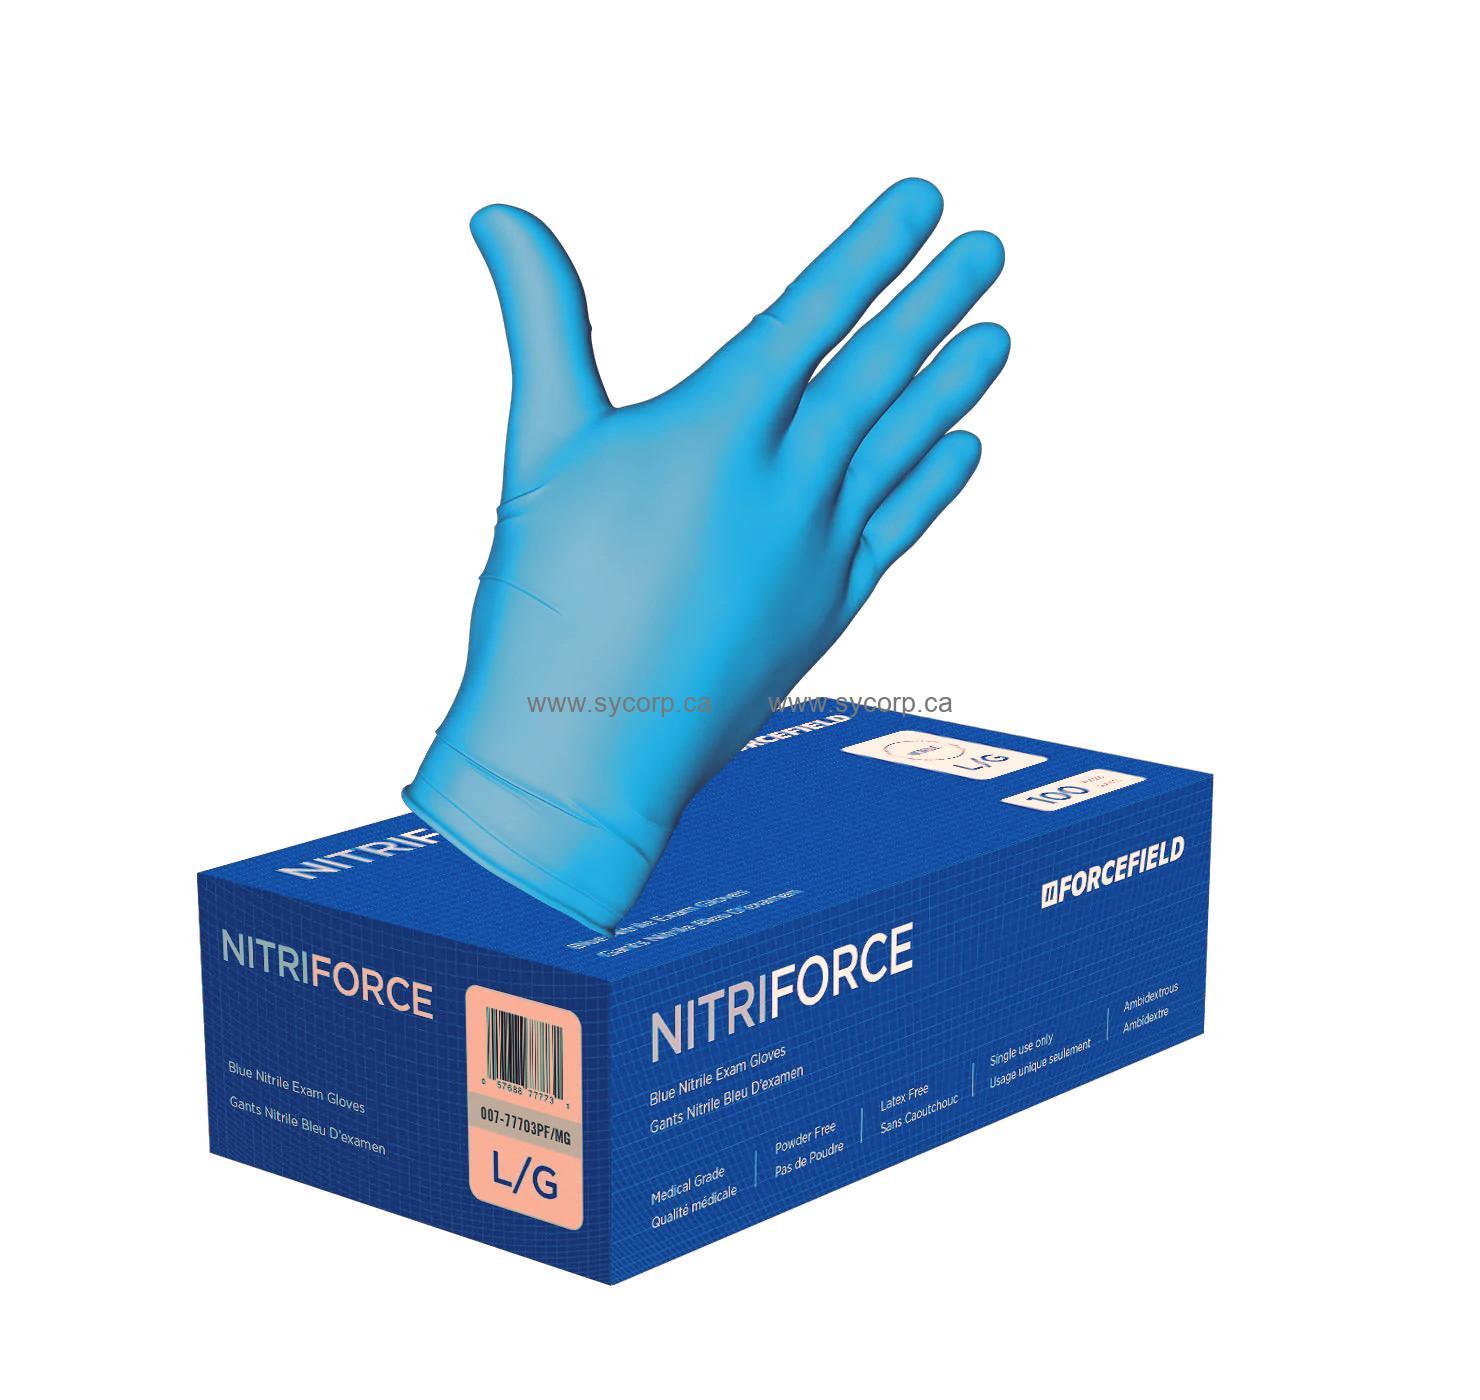 https://www.sycorp.ca/images/watermarked/1/thumbnails/1480/1400/detailed/7/007-77703pf_nitriforce_5mil_blue_nitrile_gloves_e9nu-yb.jpg